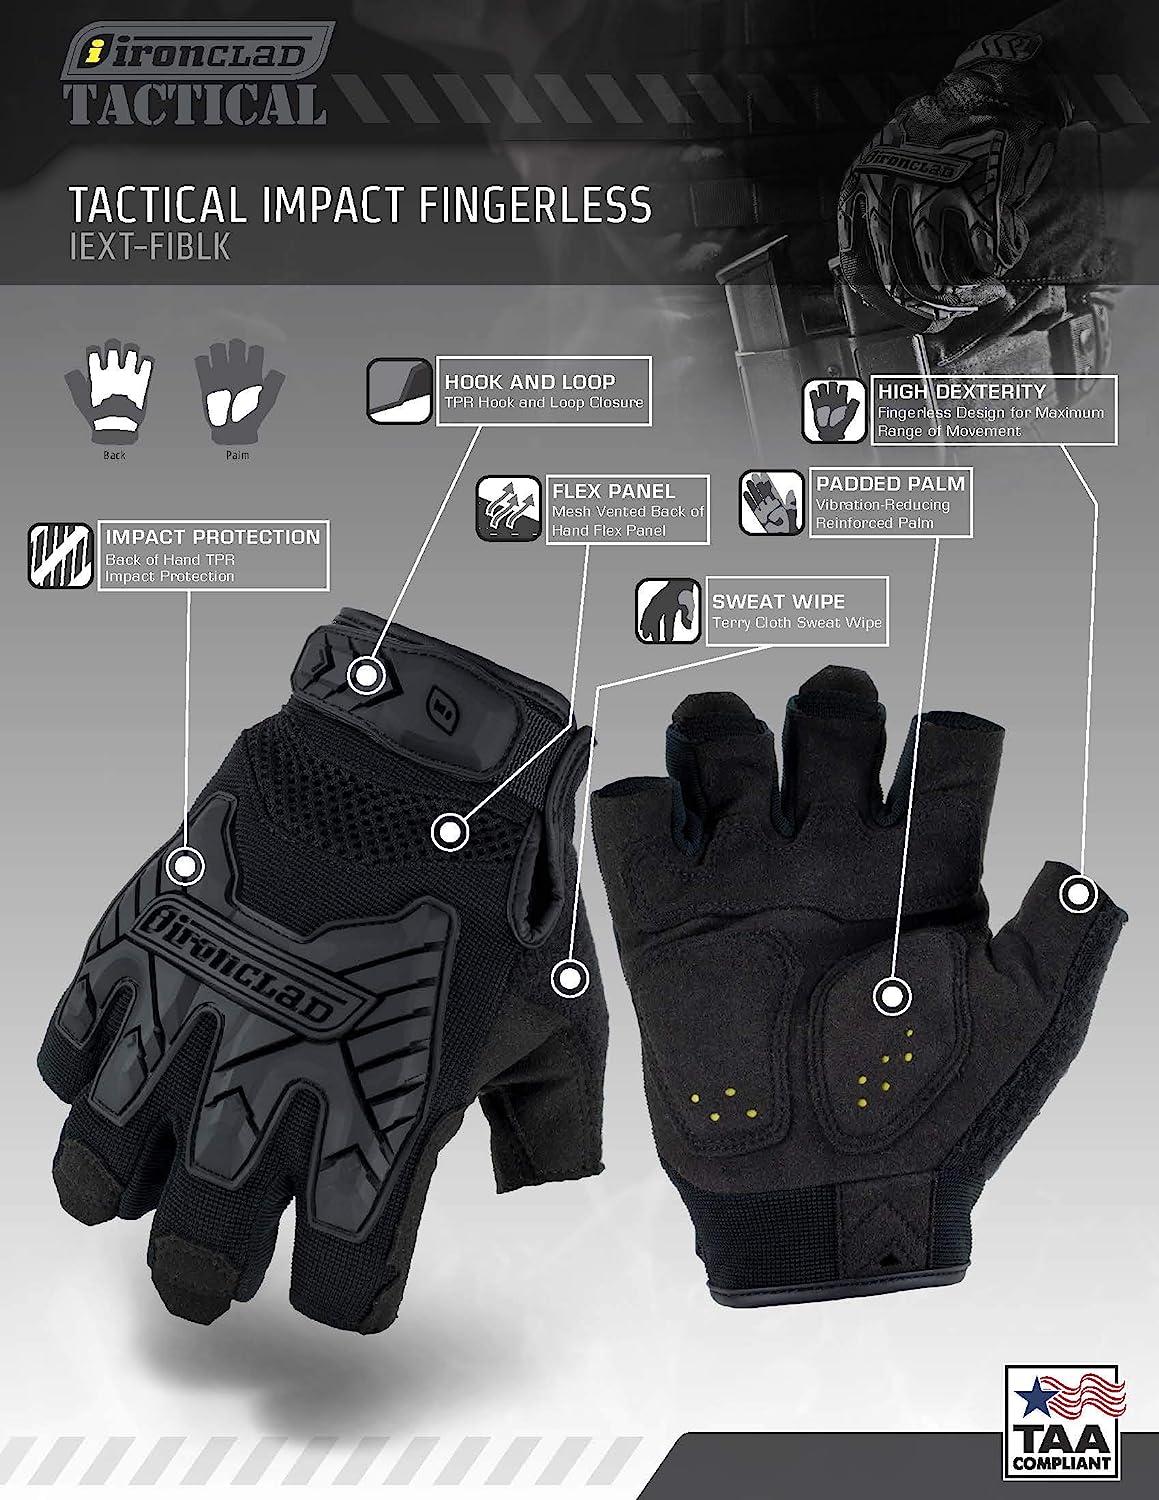 Ironclad Tactical Impact Fingerless Gloves, TAA Compliant, Best for Military,  Law Enforcement, Airsoft, Paintball, Machine Washable, Sized S, M, L, XL,  XXL (1 Pair), Black, Small (IEXT-FIBLK-02-S)